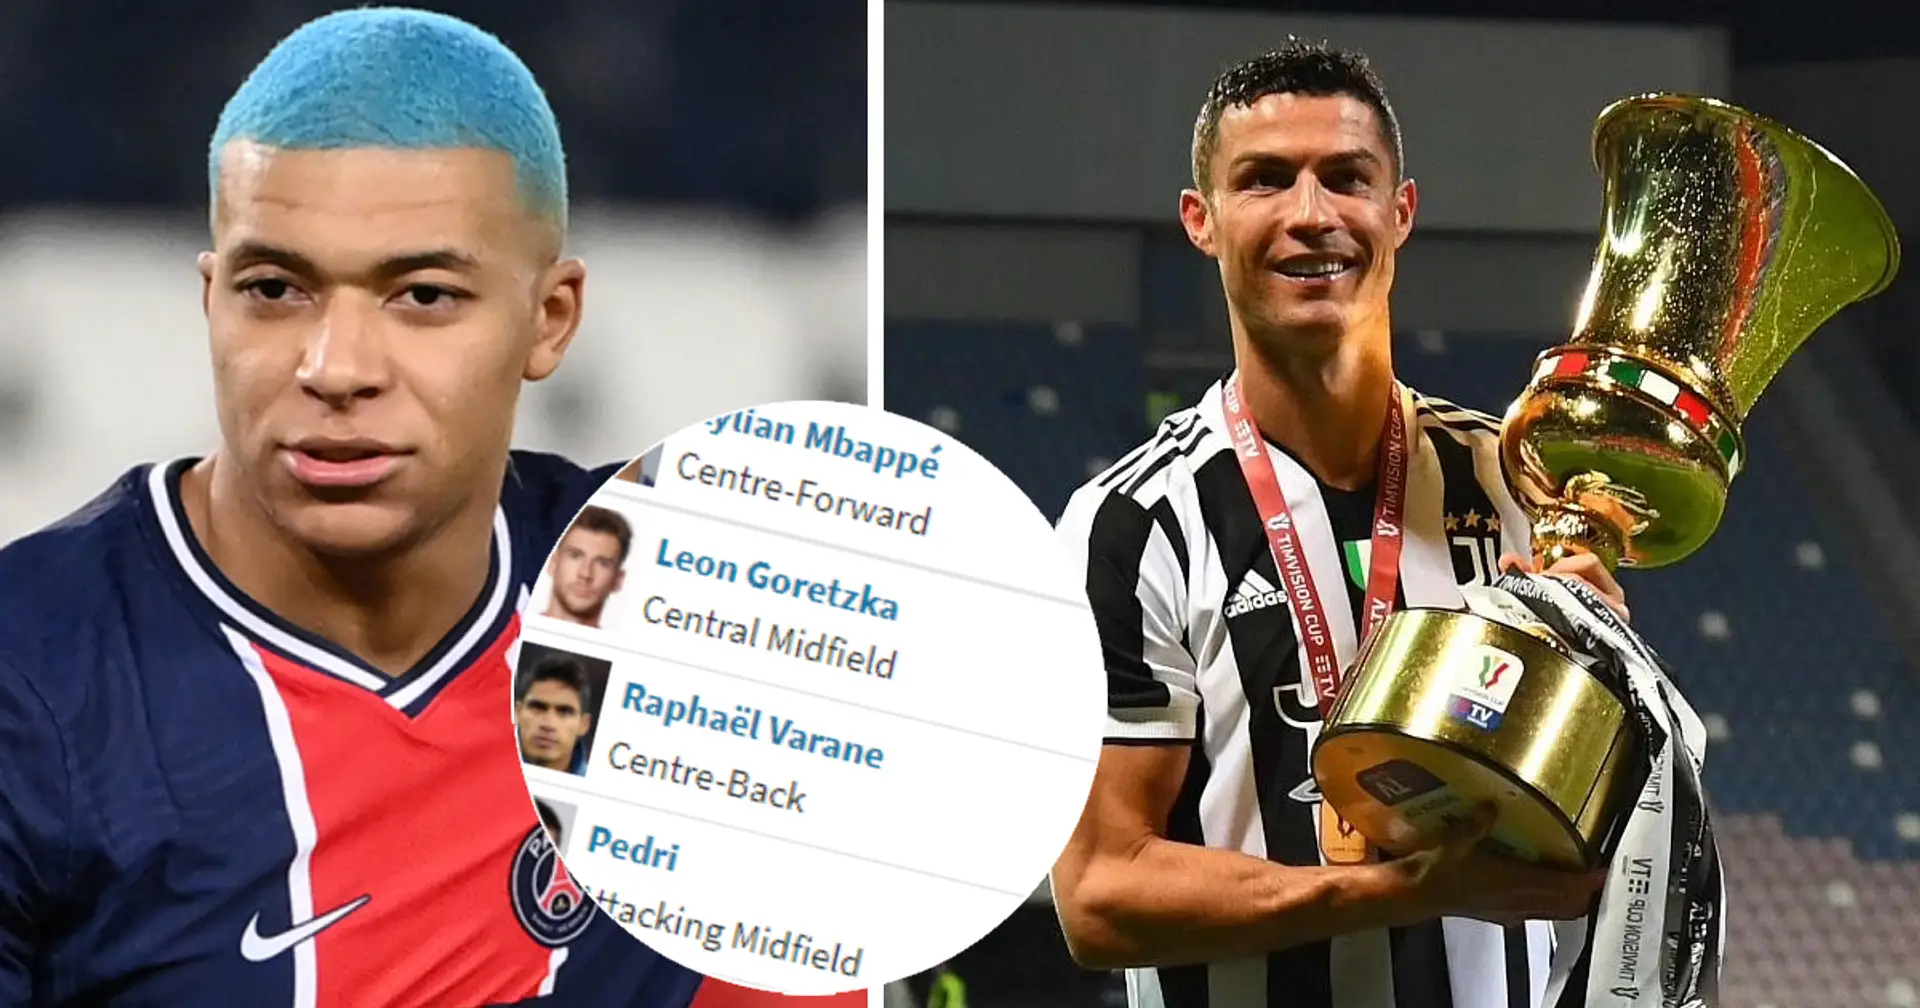 Mbappe, Ronaldo and other top stars among most valuable players whose contracts expire in 2022